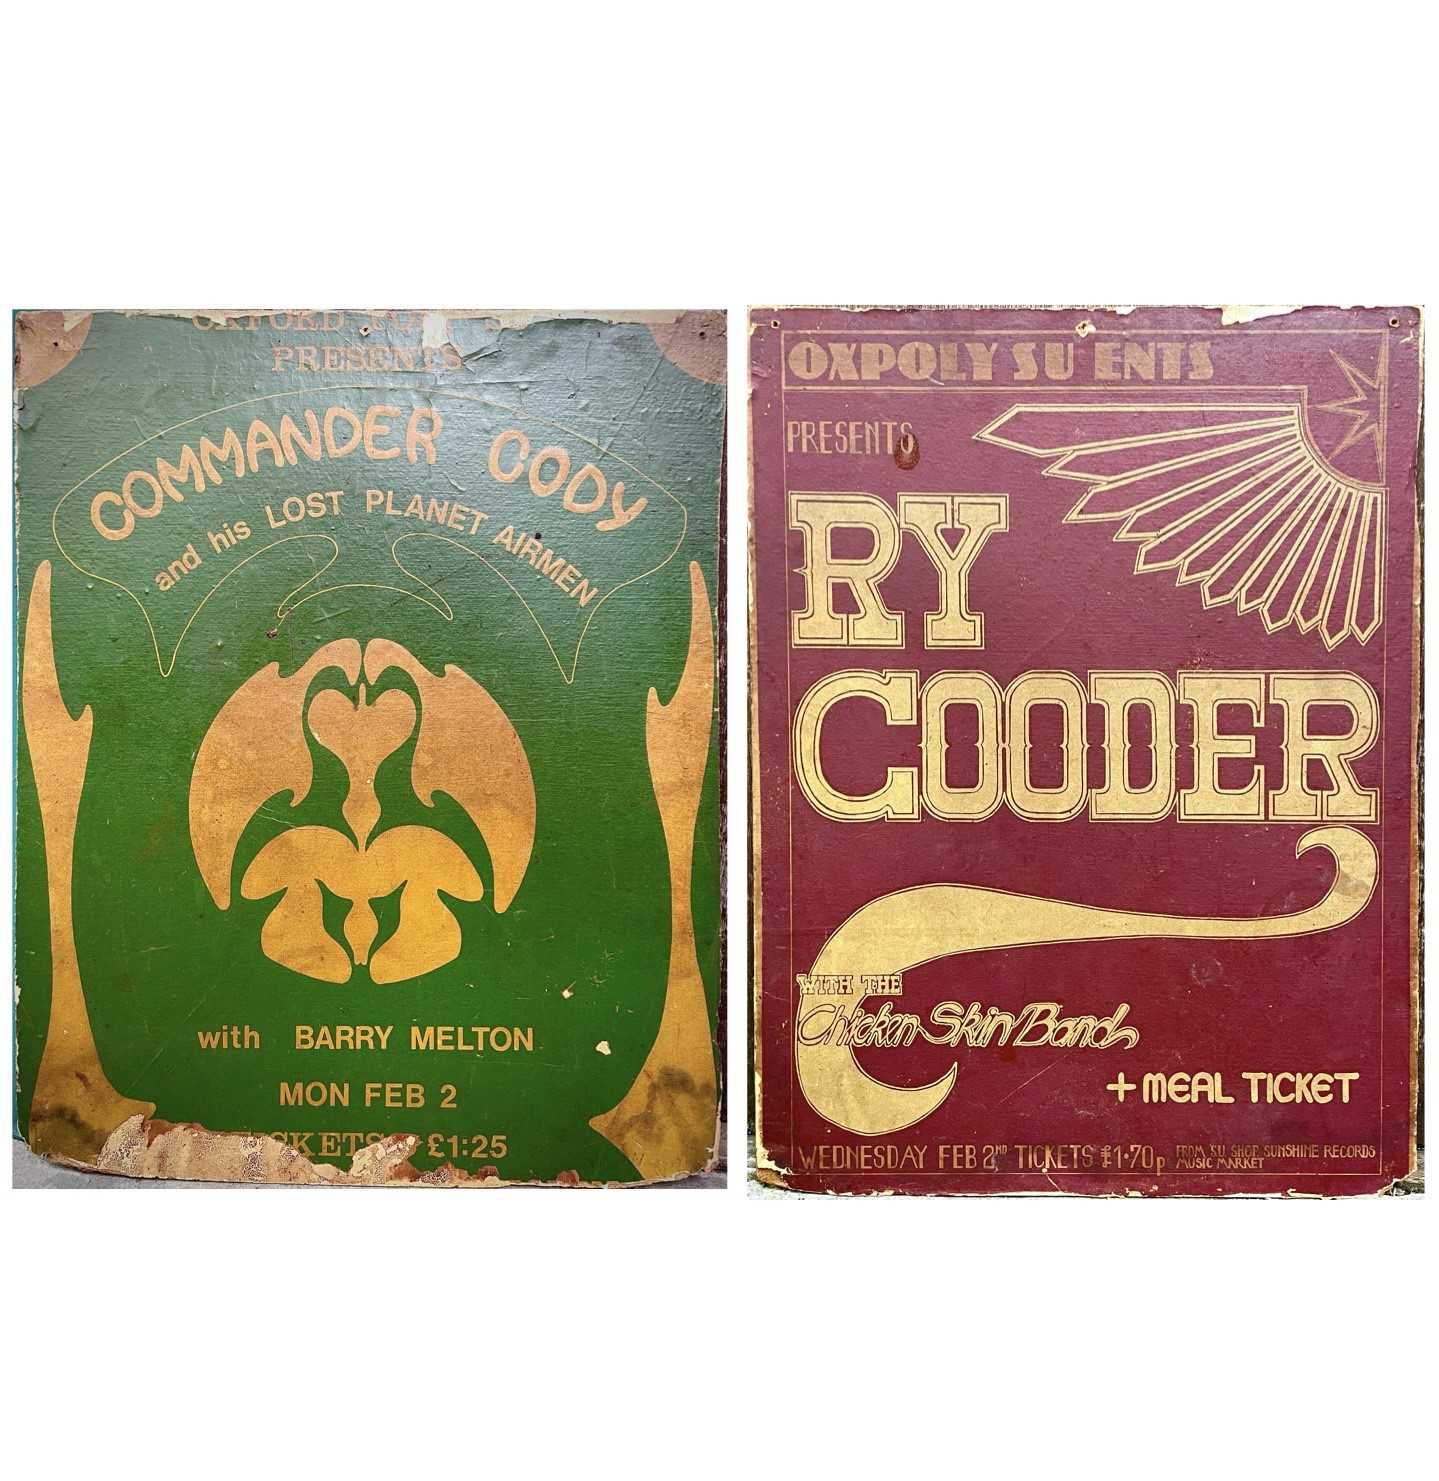 Lot 44 - 'Ry Cooder' and 'Commanding Cody' posters.